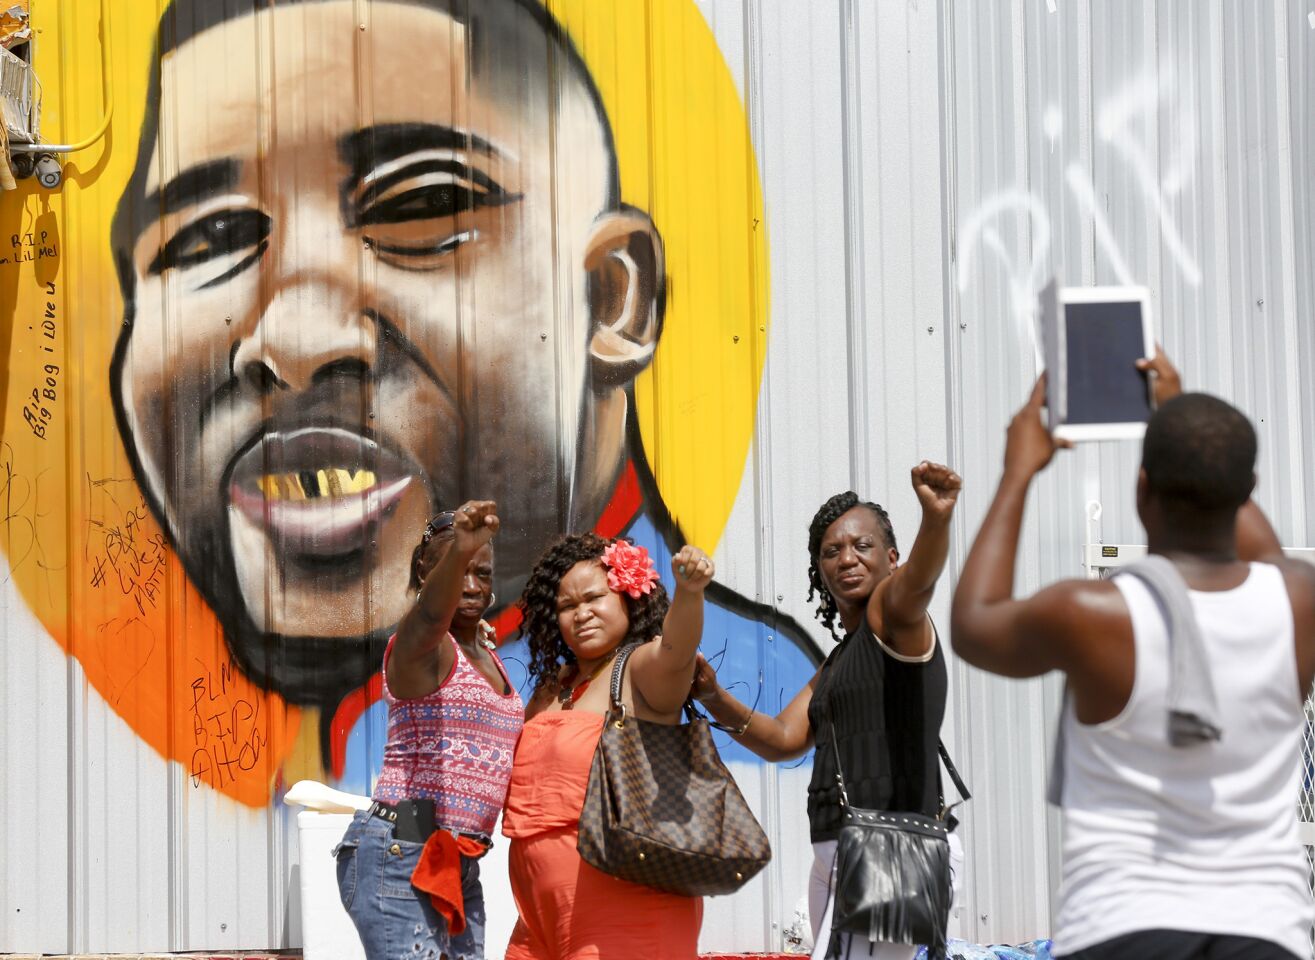 Baton Rouge, La., residents take photos with their fists raised in front of a mural of Alton Sterling, who was killed by police in early July.